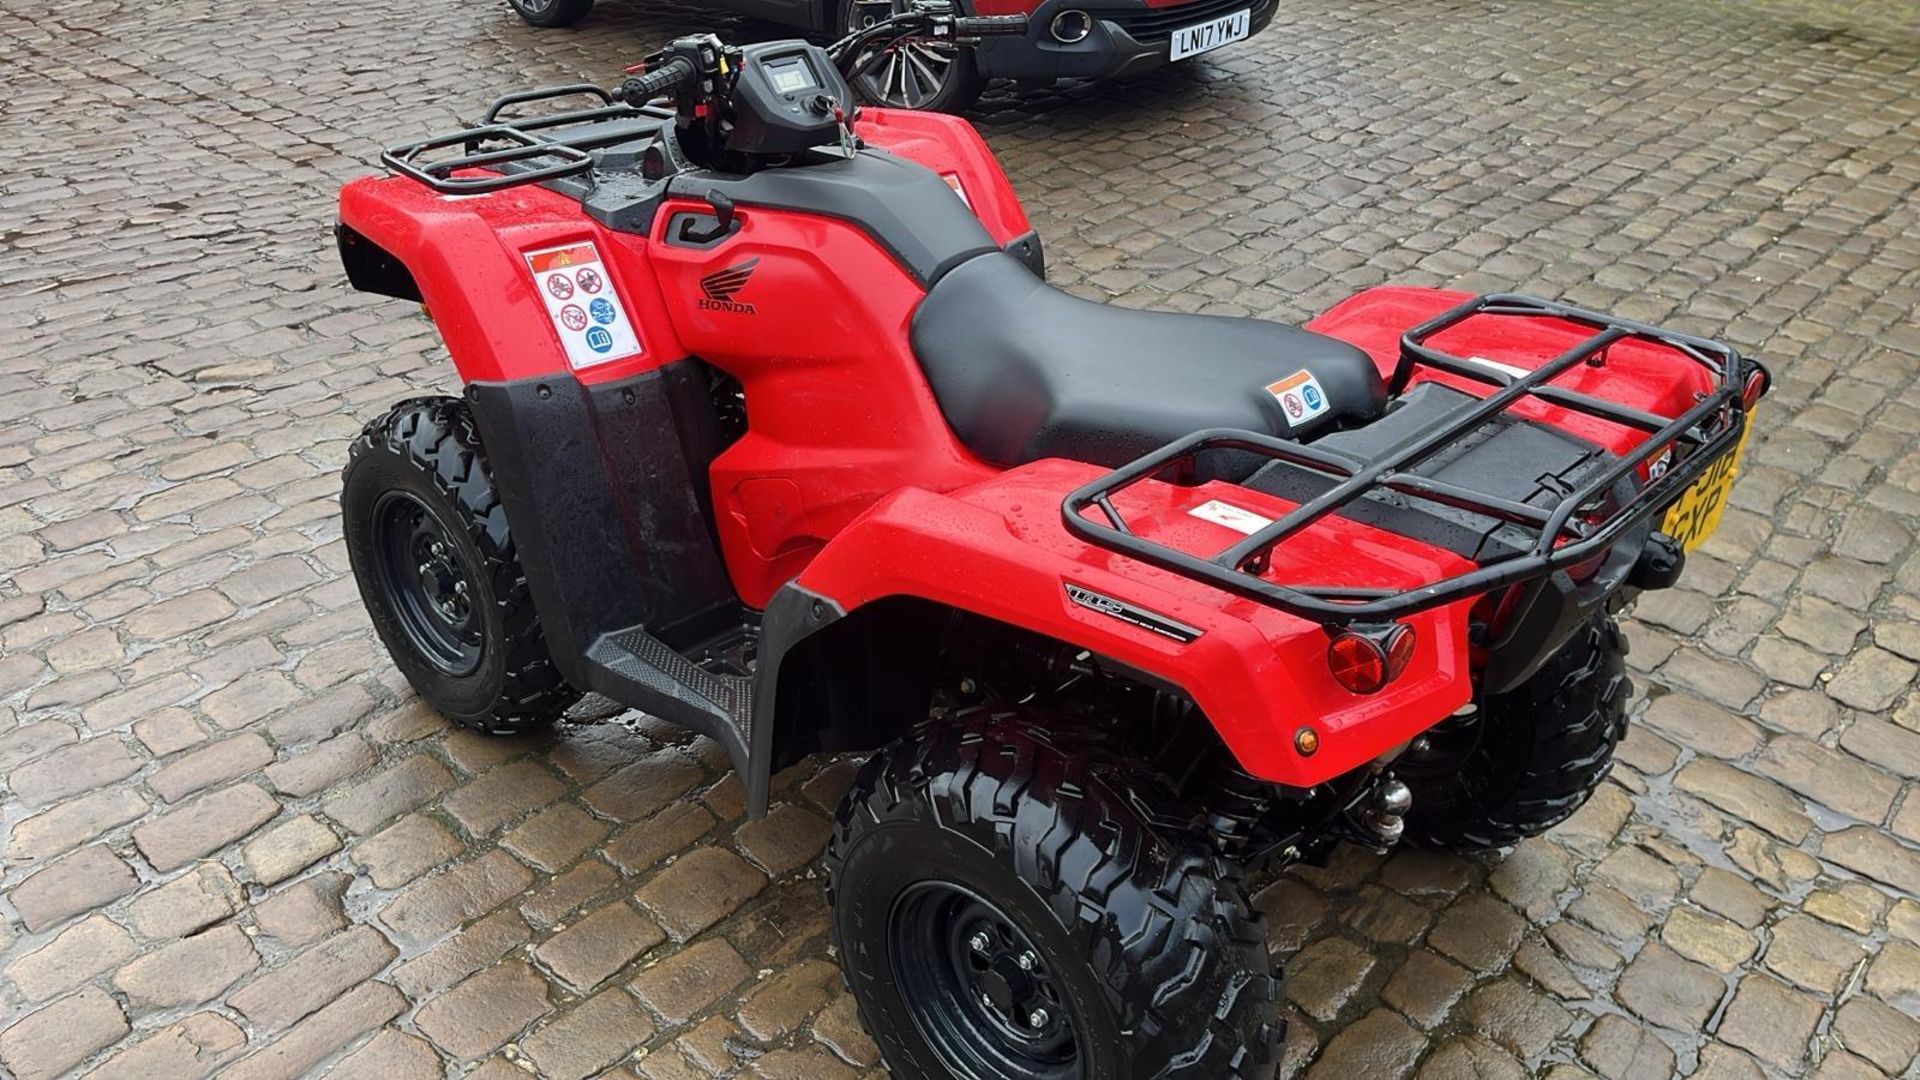 2018 HONDA TRX420FA6 FOURTRAX RANCHER AUTOMATIC DCT QUAD BIKE CAN BE SWITCED FROM 2 TO 4 WHEEL DRIVE - Image 14 of 21